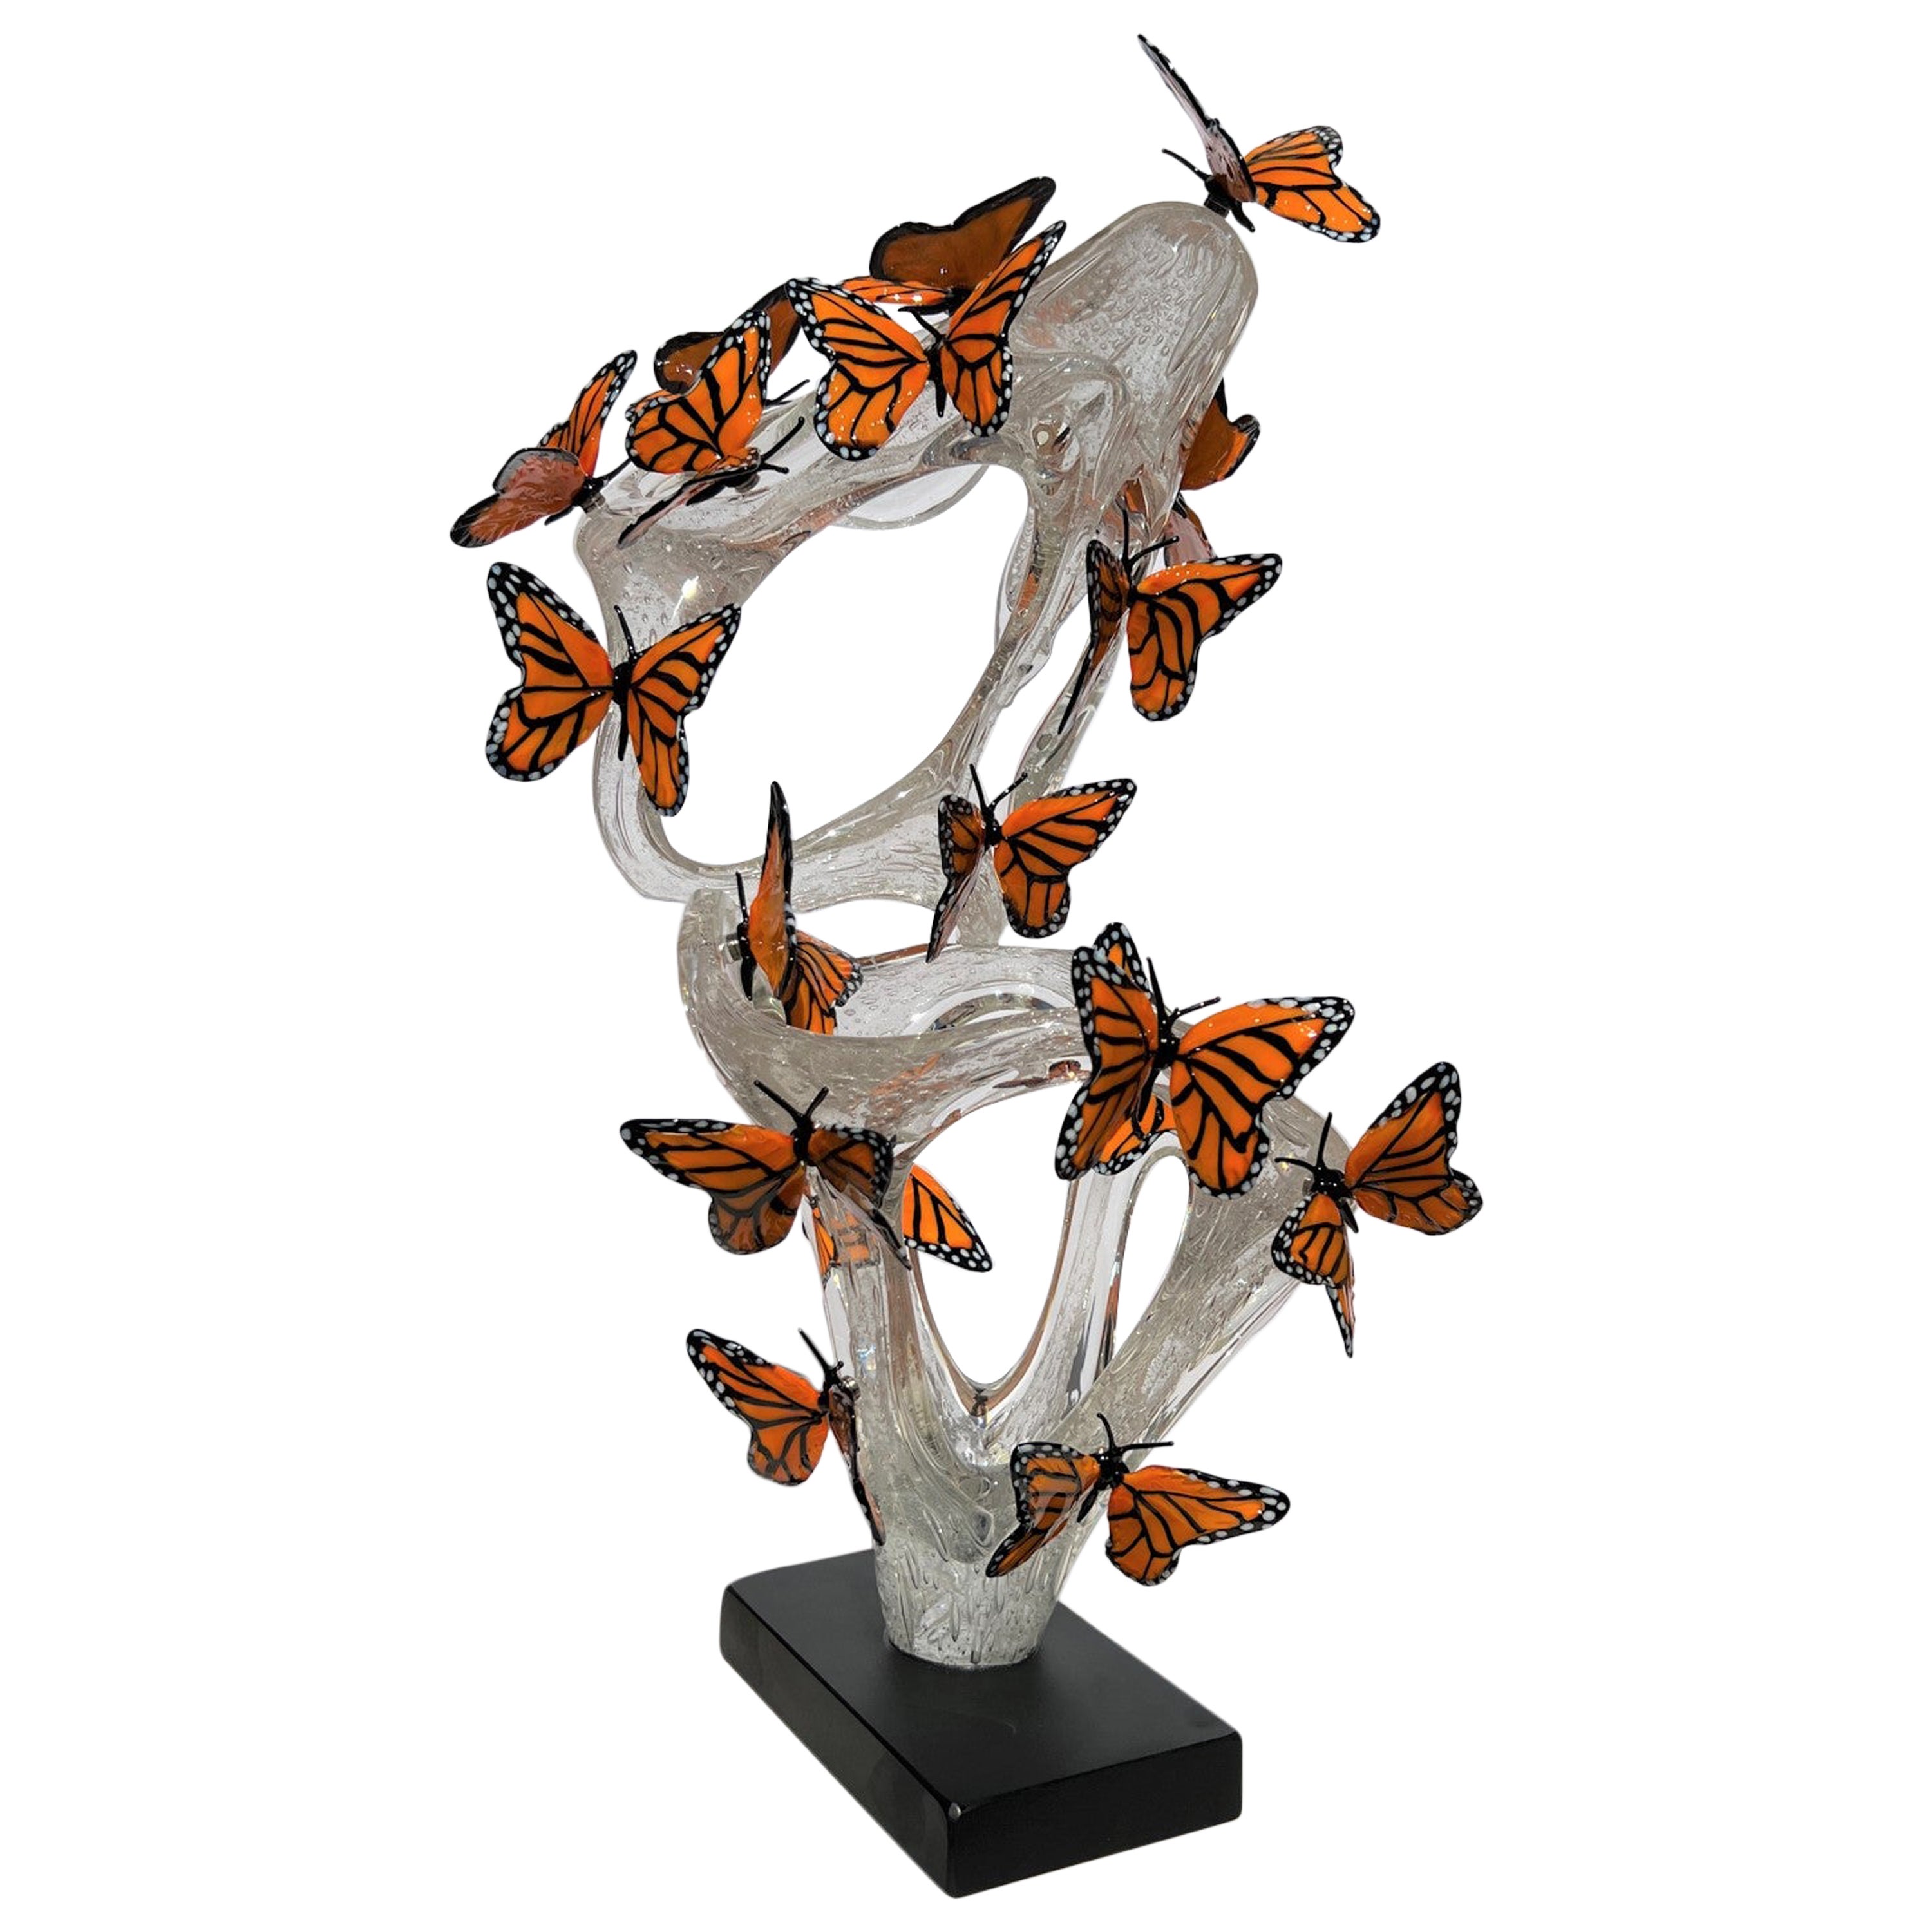 Costantini Diego Modern Crystal Murano Glass Infinity Sculpture With Butterflies For Sale